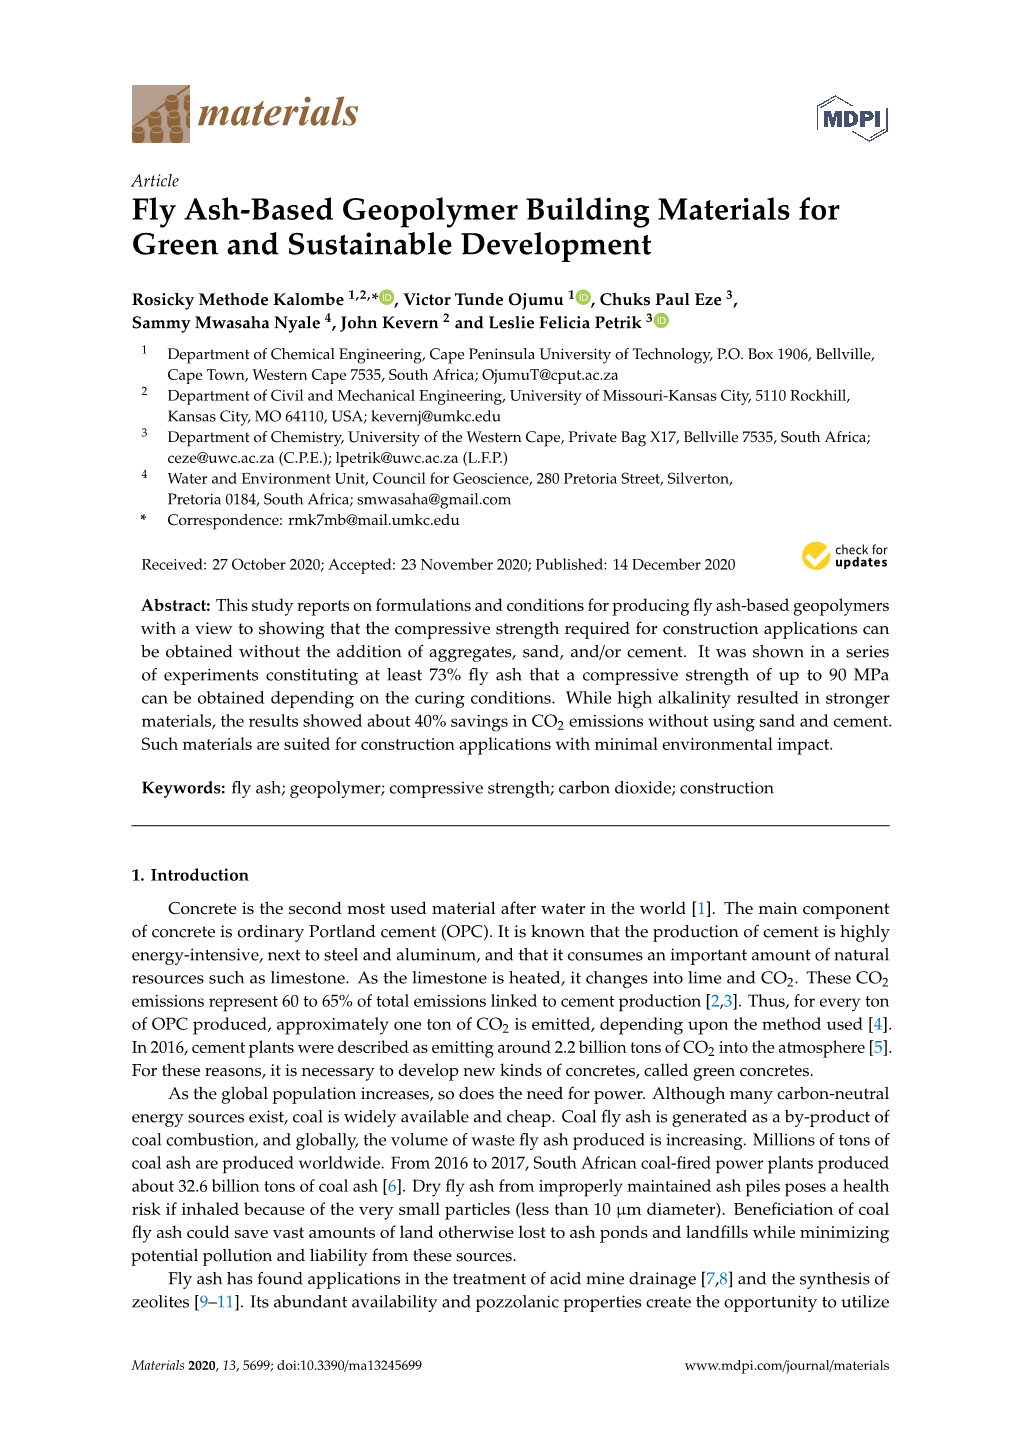 Fly Ash-Based Geopolymer Building Materials for Green and Sustainable Development